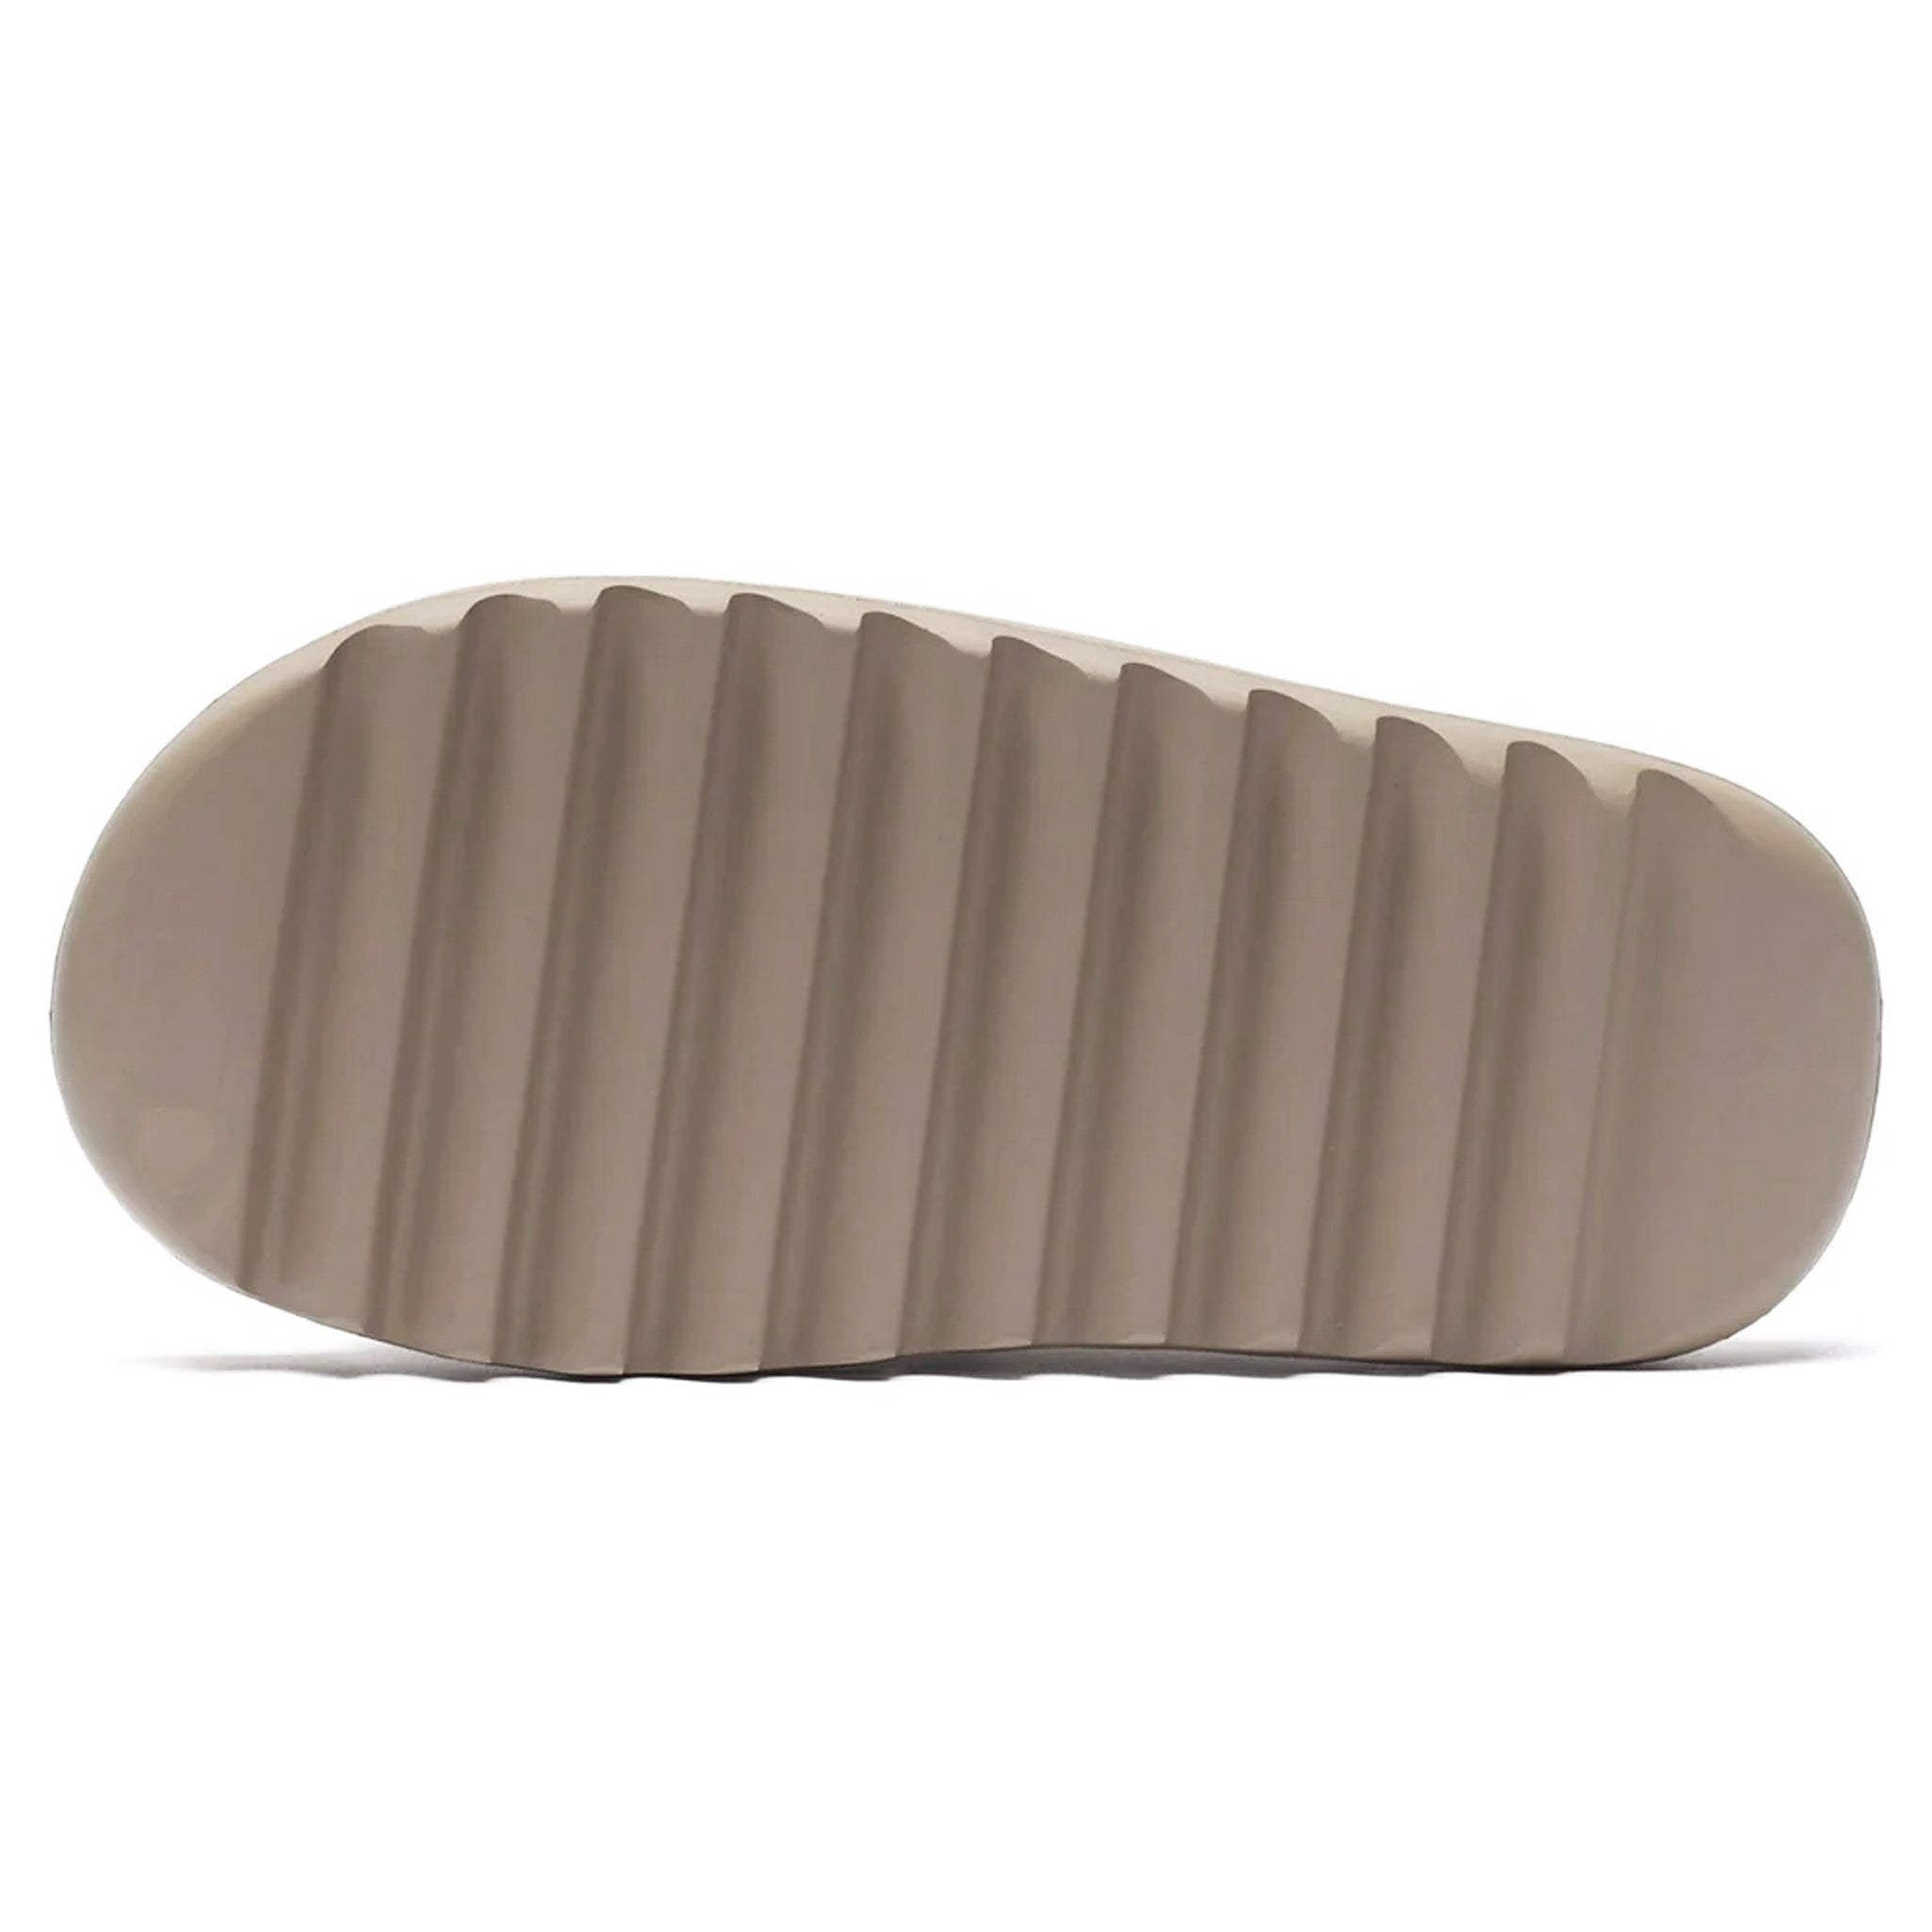 Sole view of Adidas Yeezy Slide Pure (Restock) GW1934